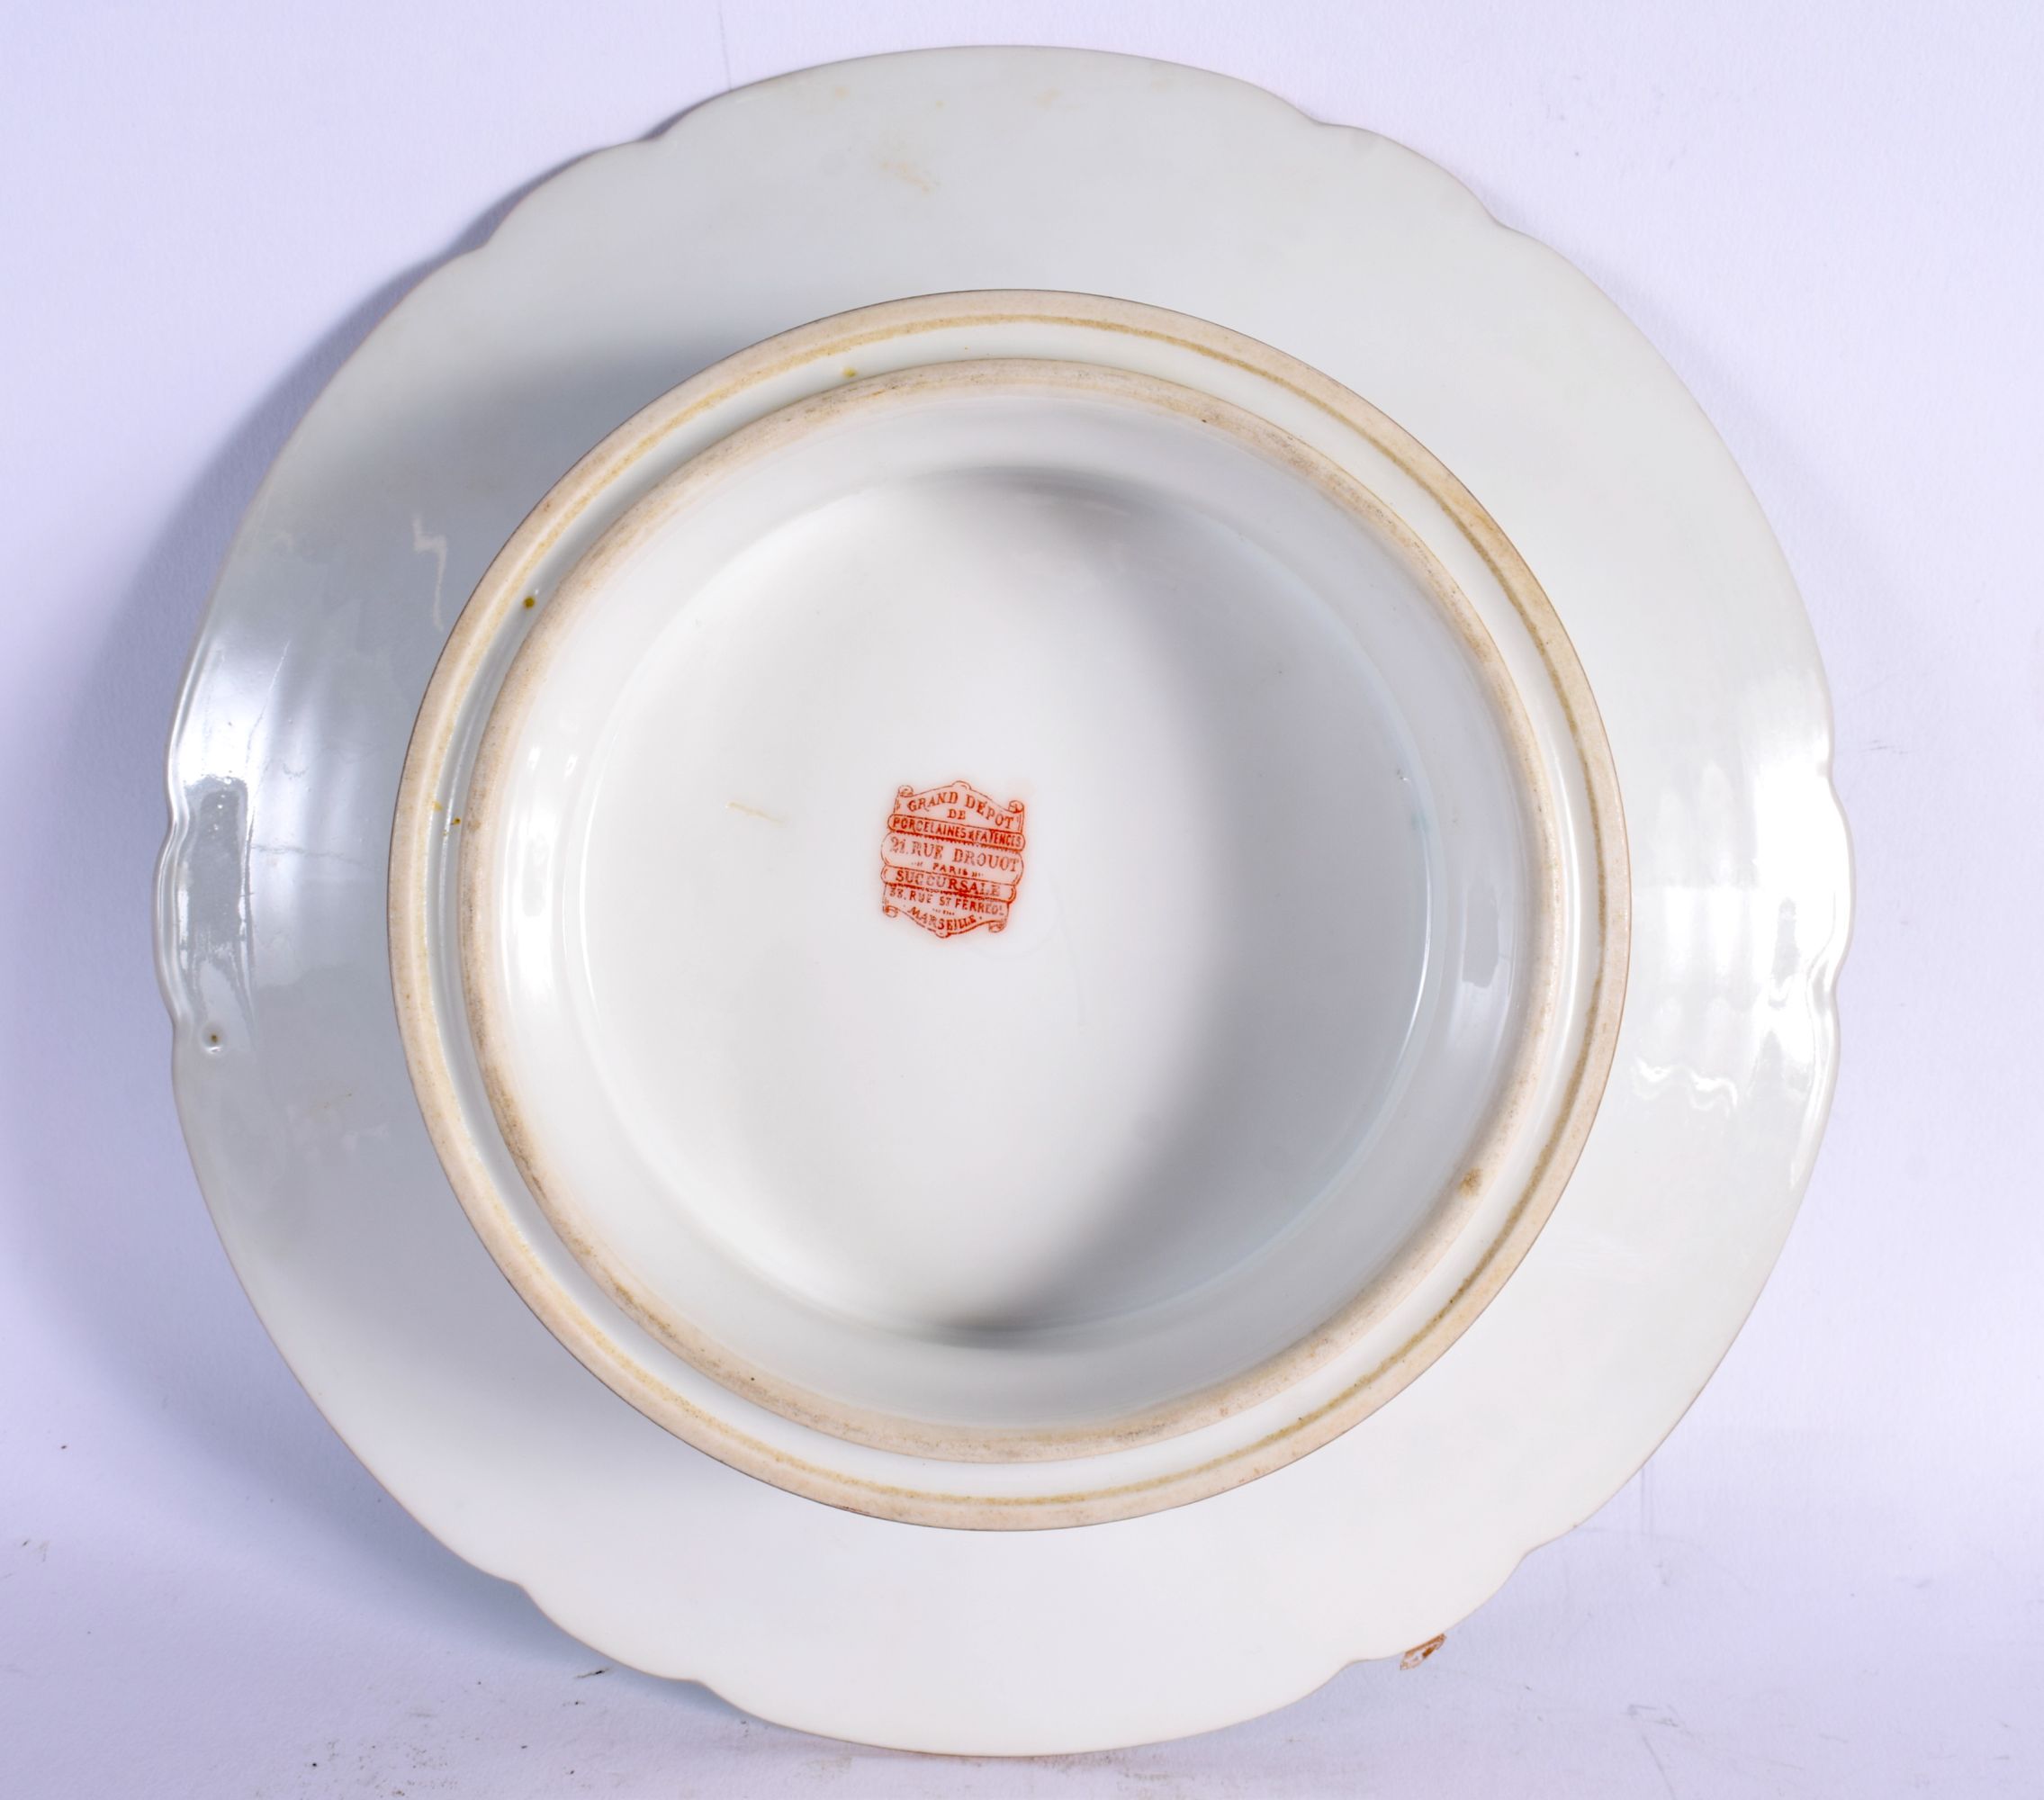 A LARGE AND EXTENSIVE LATE 19TH CENTURY FRENCH PORCELAIN DINNER SERVICE painted with a monogram. Lar - Image 7 of 14